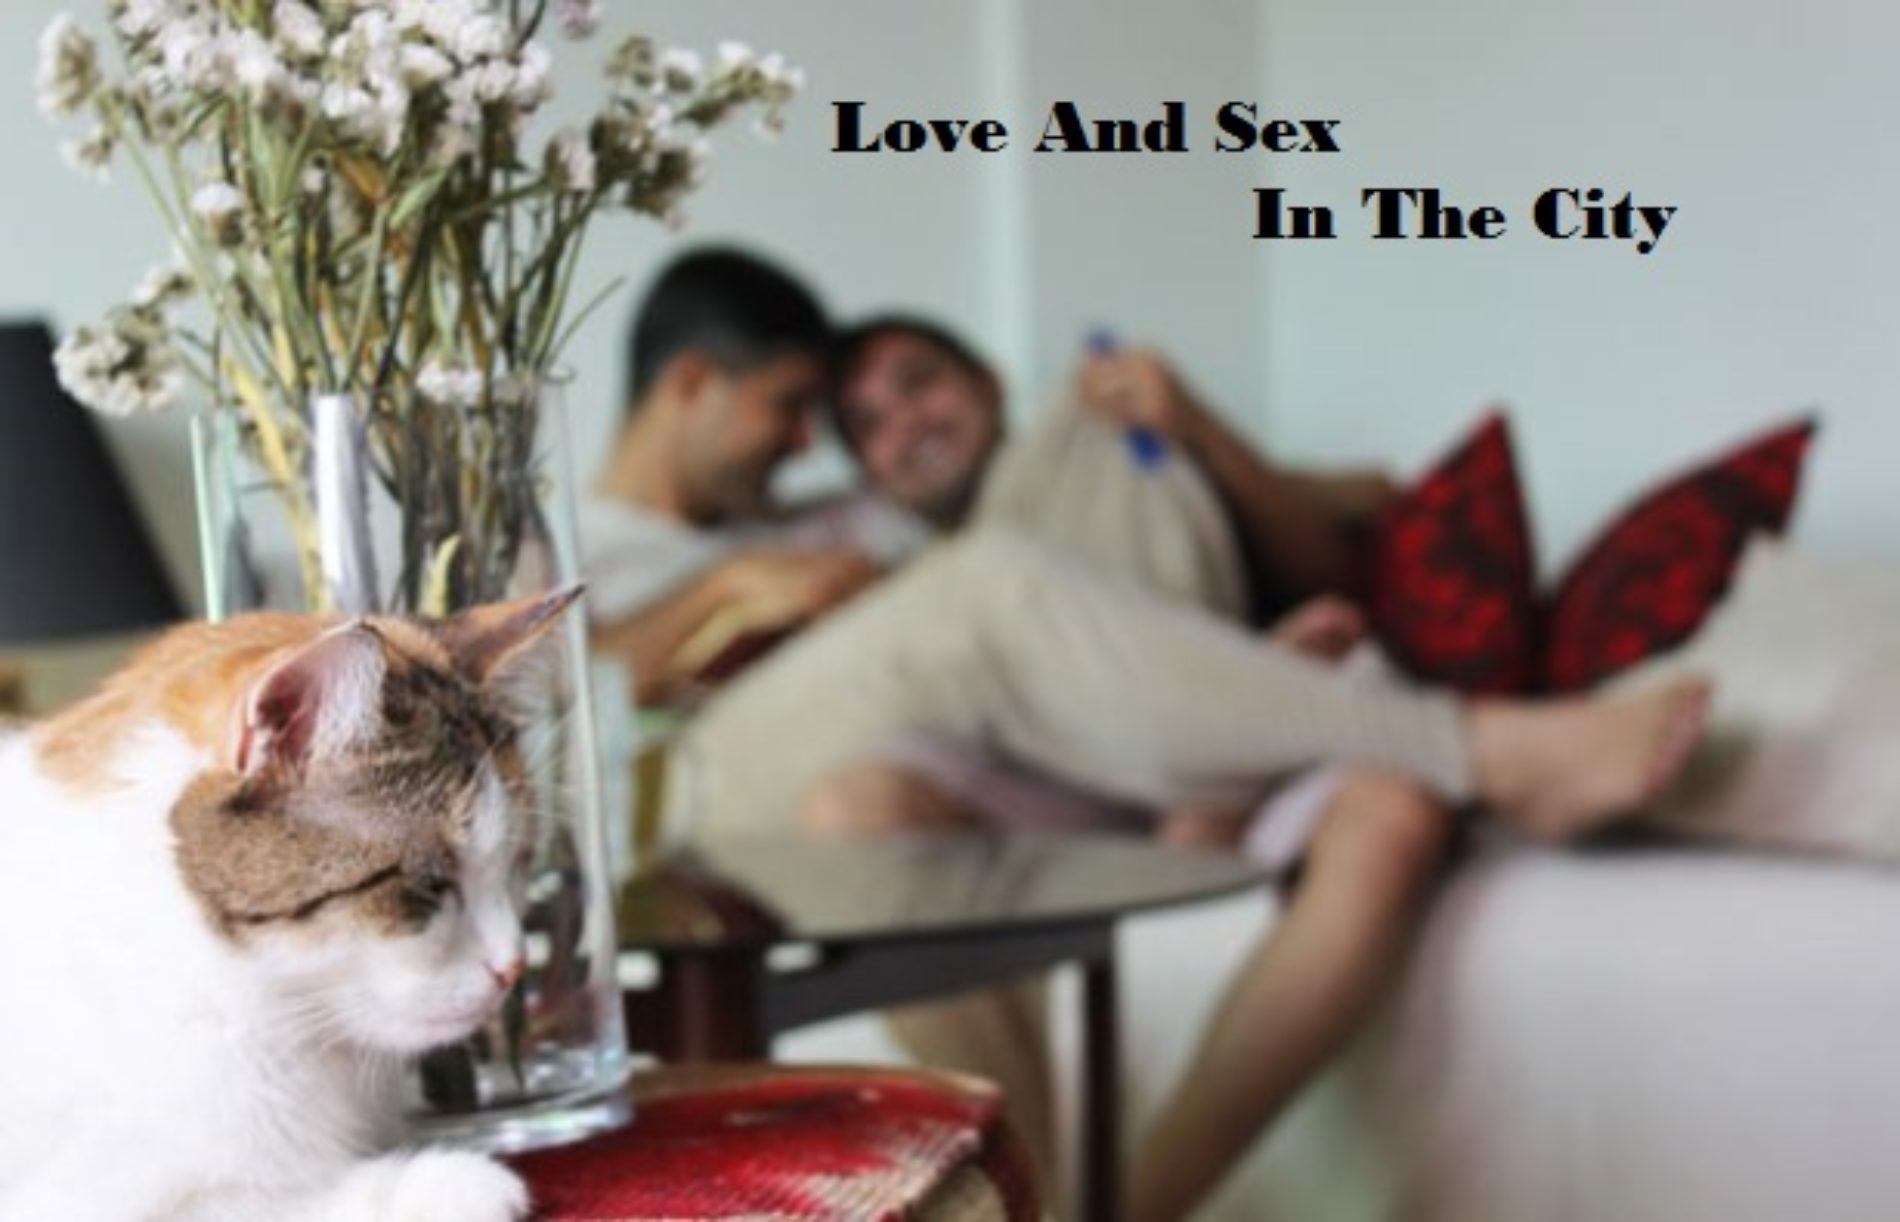 LOVE AND SEX IN THE CITY (Episode 46)